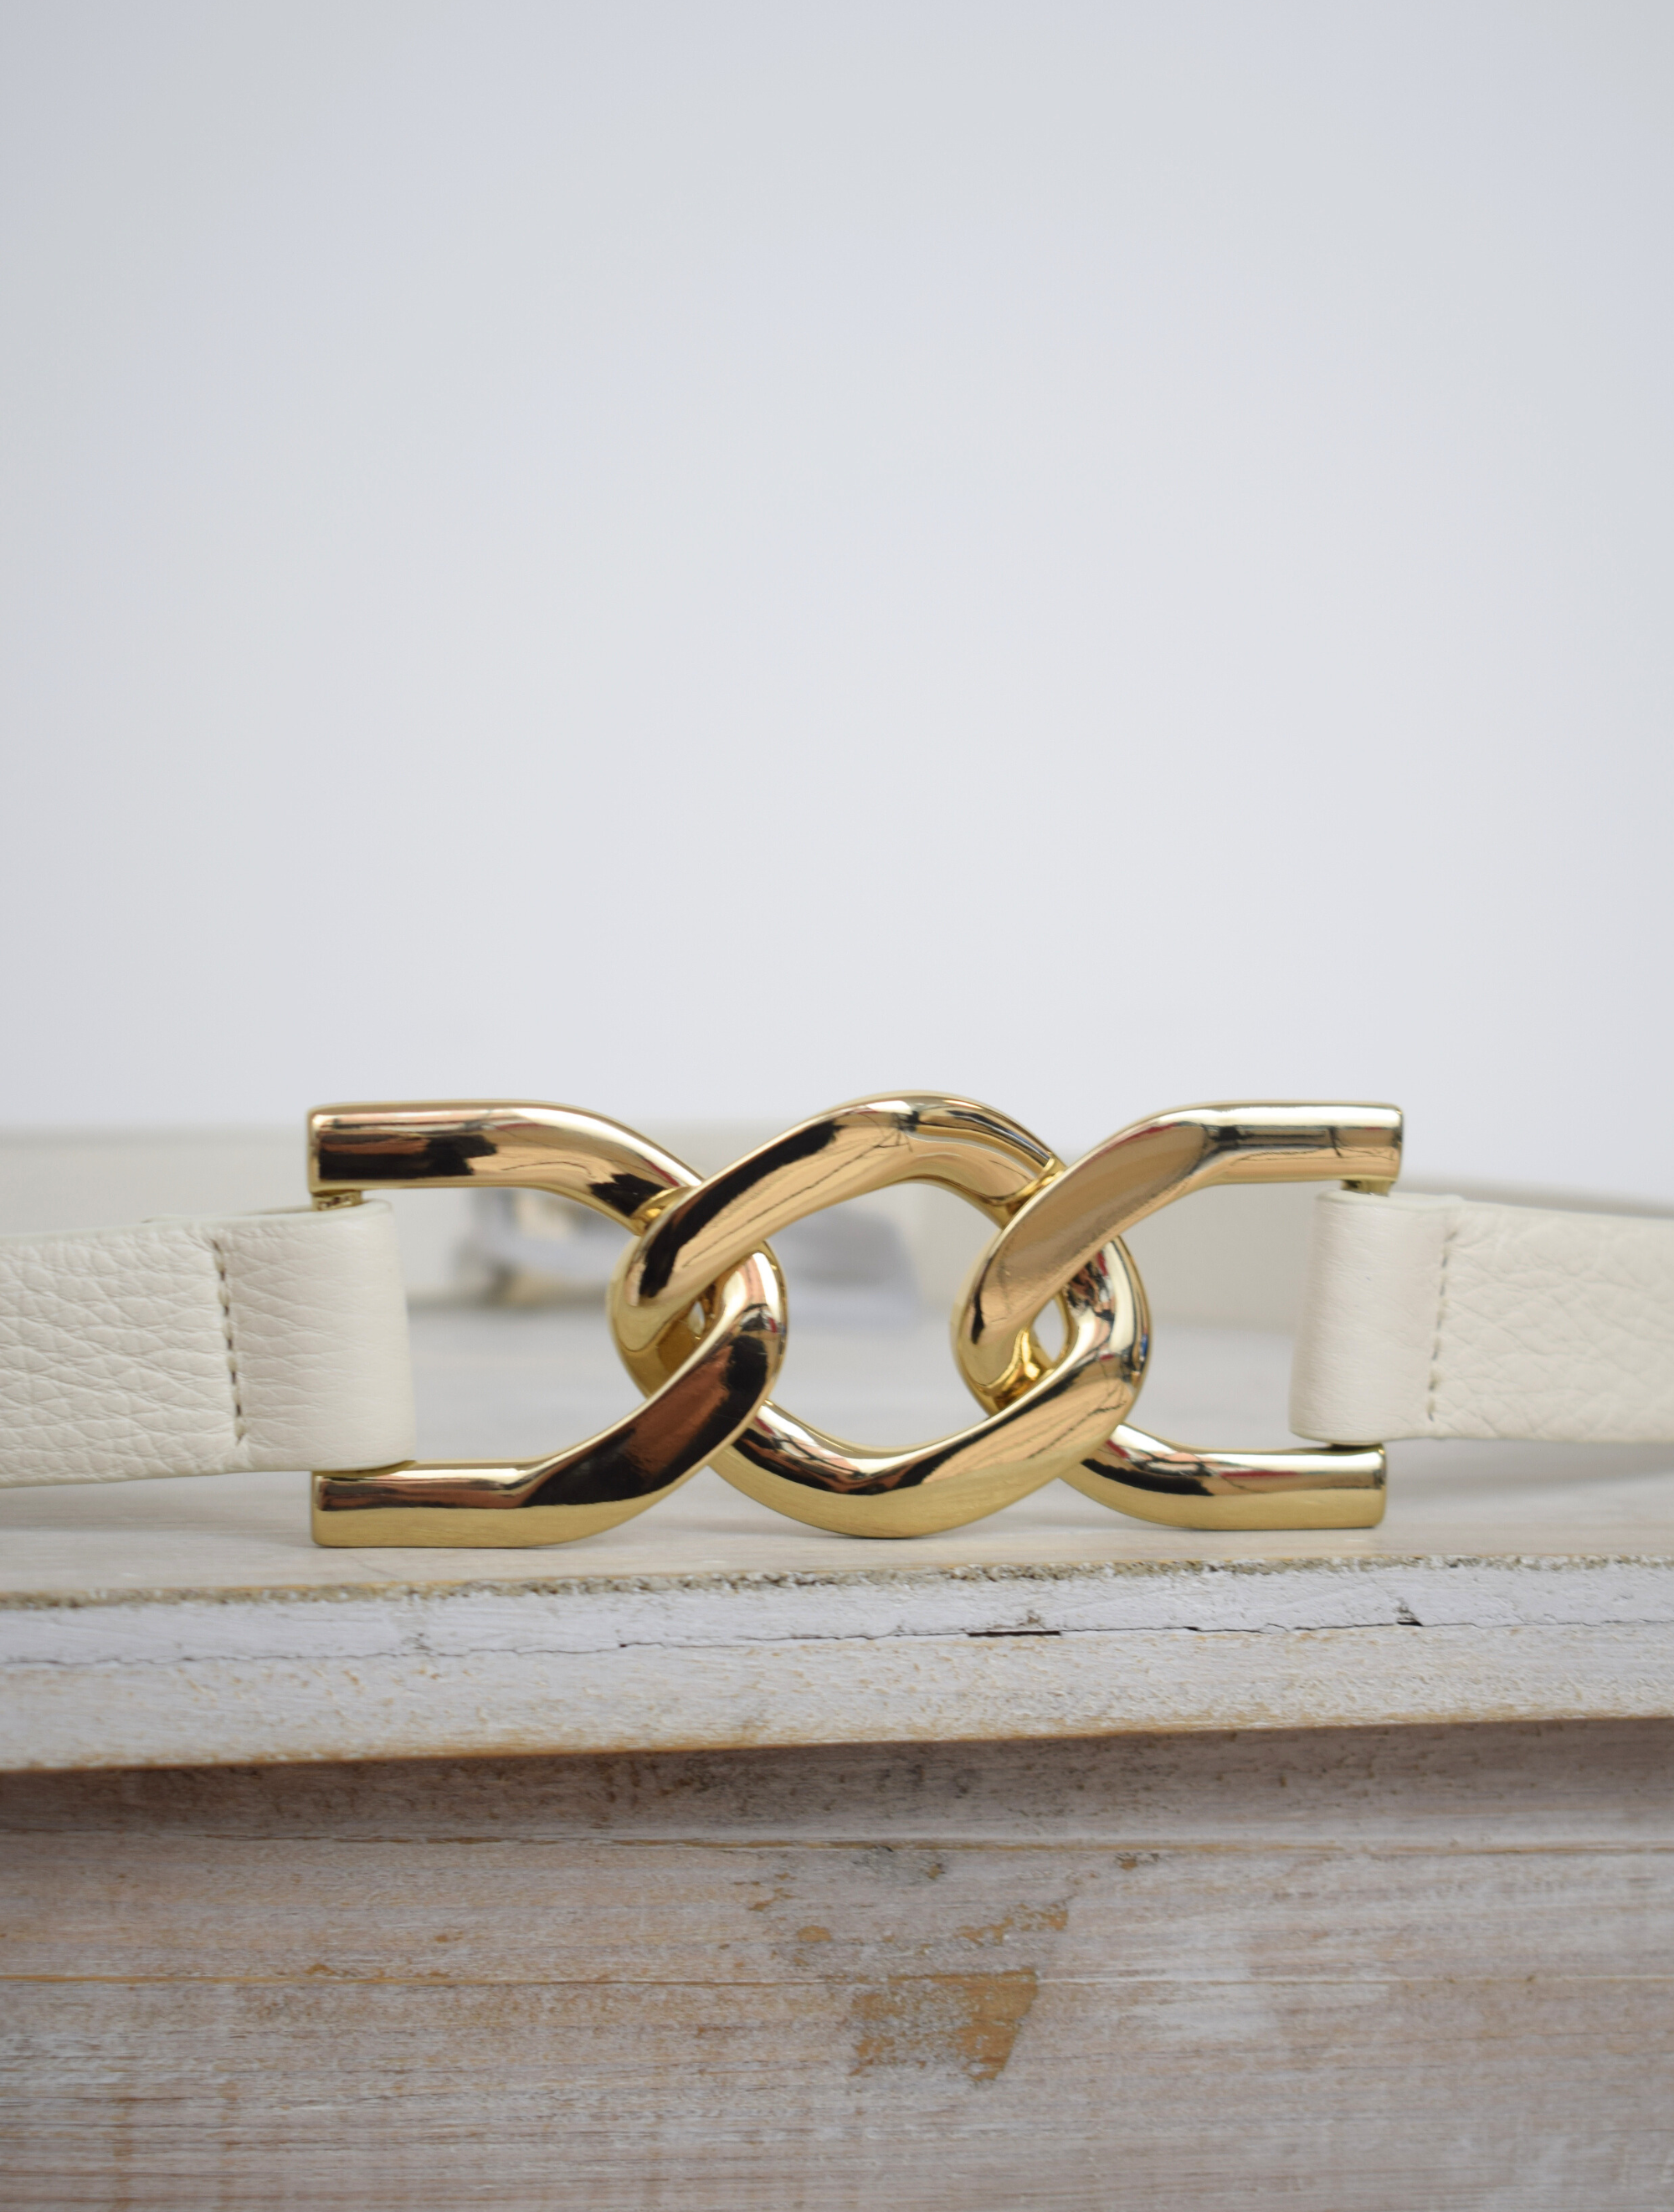 Ivory leather belt with gold metallic link feature at the front and press stud fastening at the back